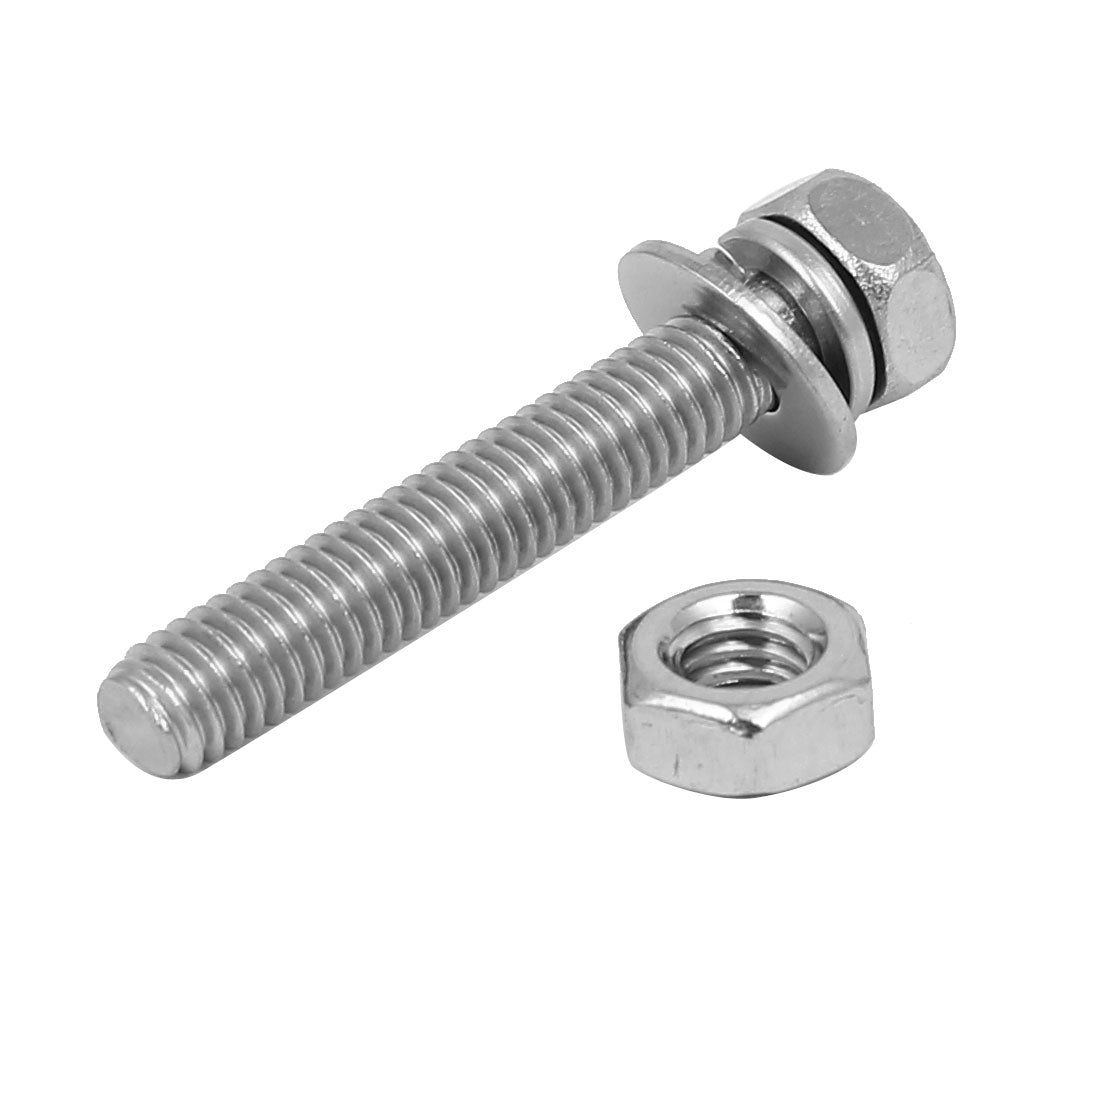 uxcell Uxcell M4 x 25mm 304 Stainless Steel Phillips Hex Head Bolts Nuts w Washers 20 Sets